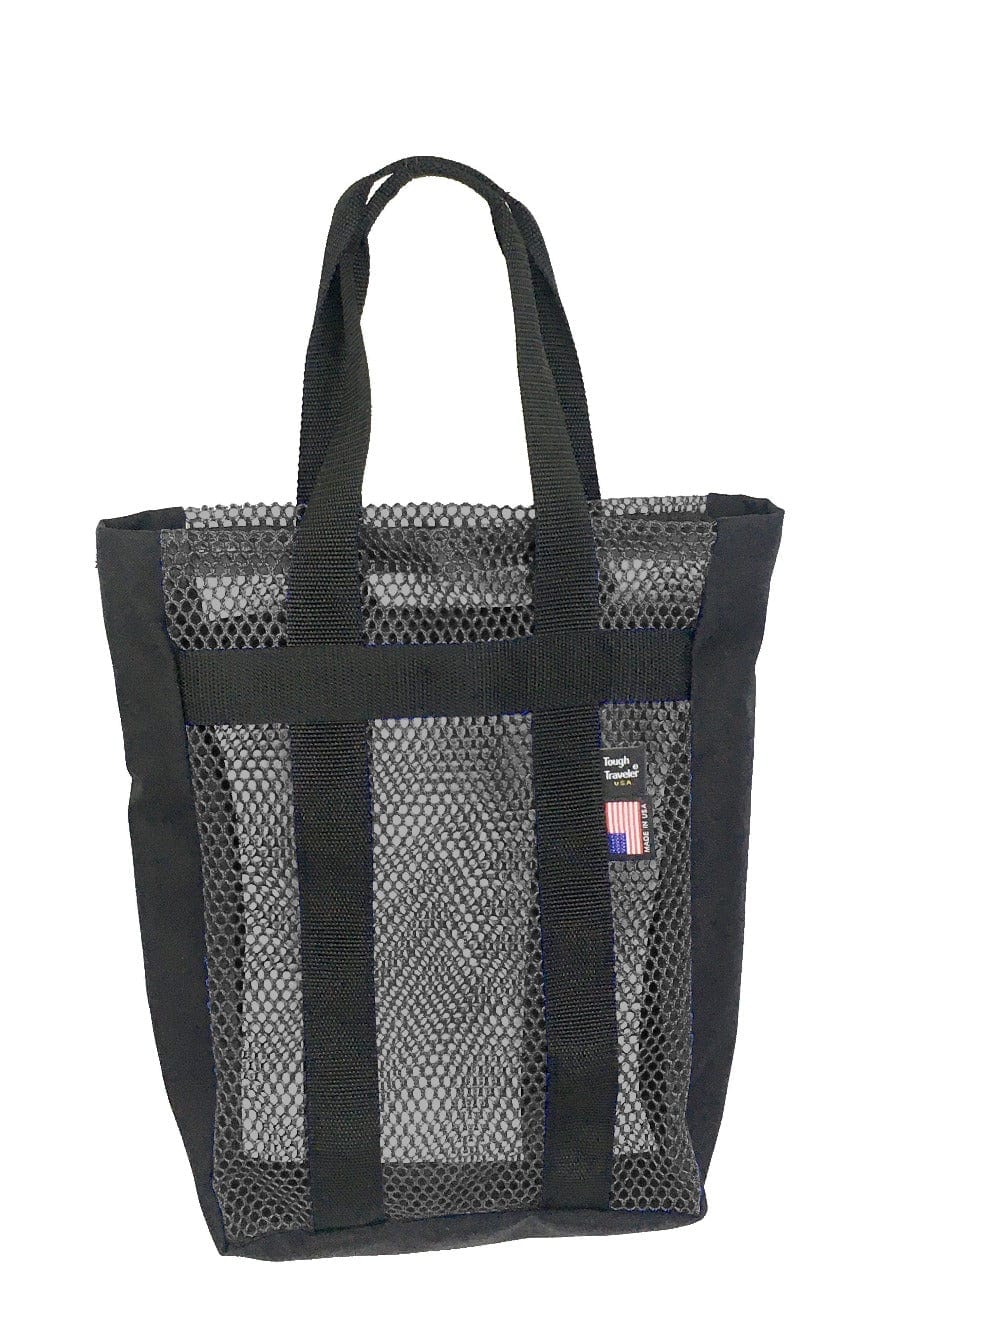 Made in USA VM Tote Tote Bags